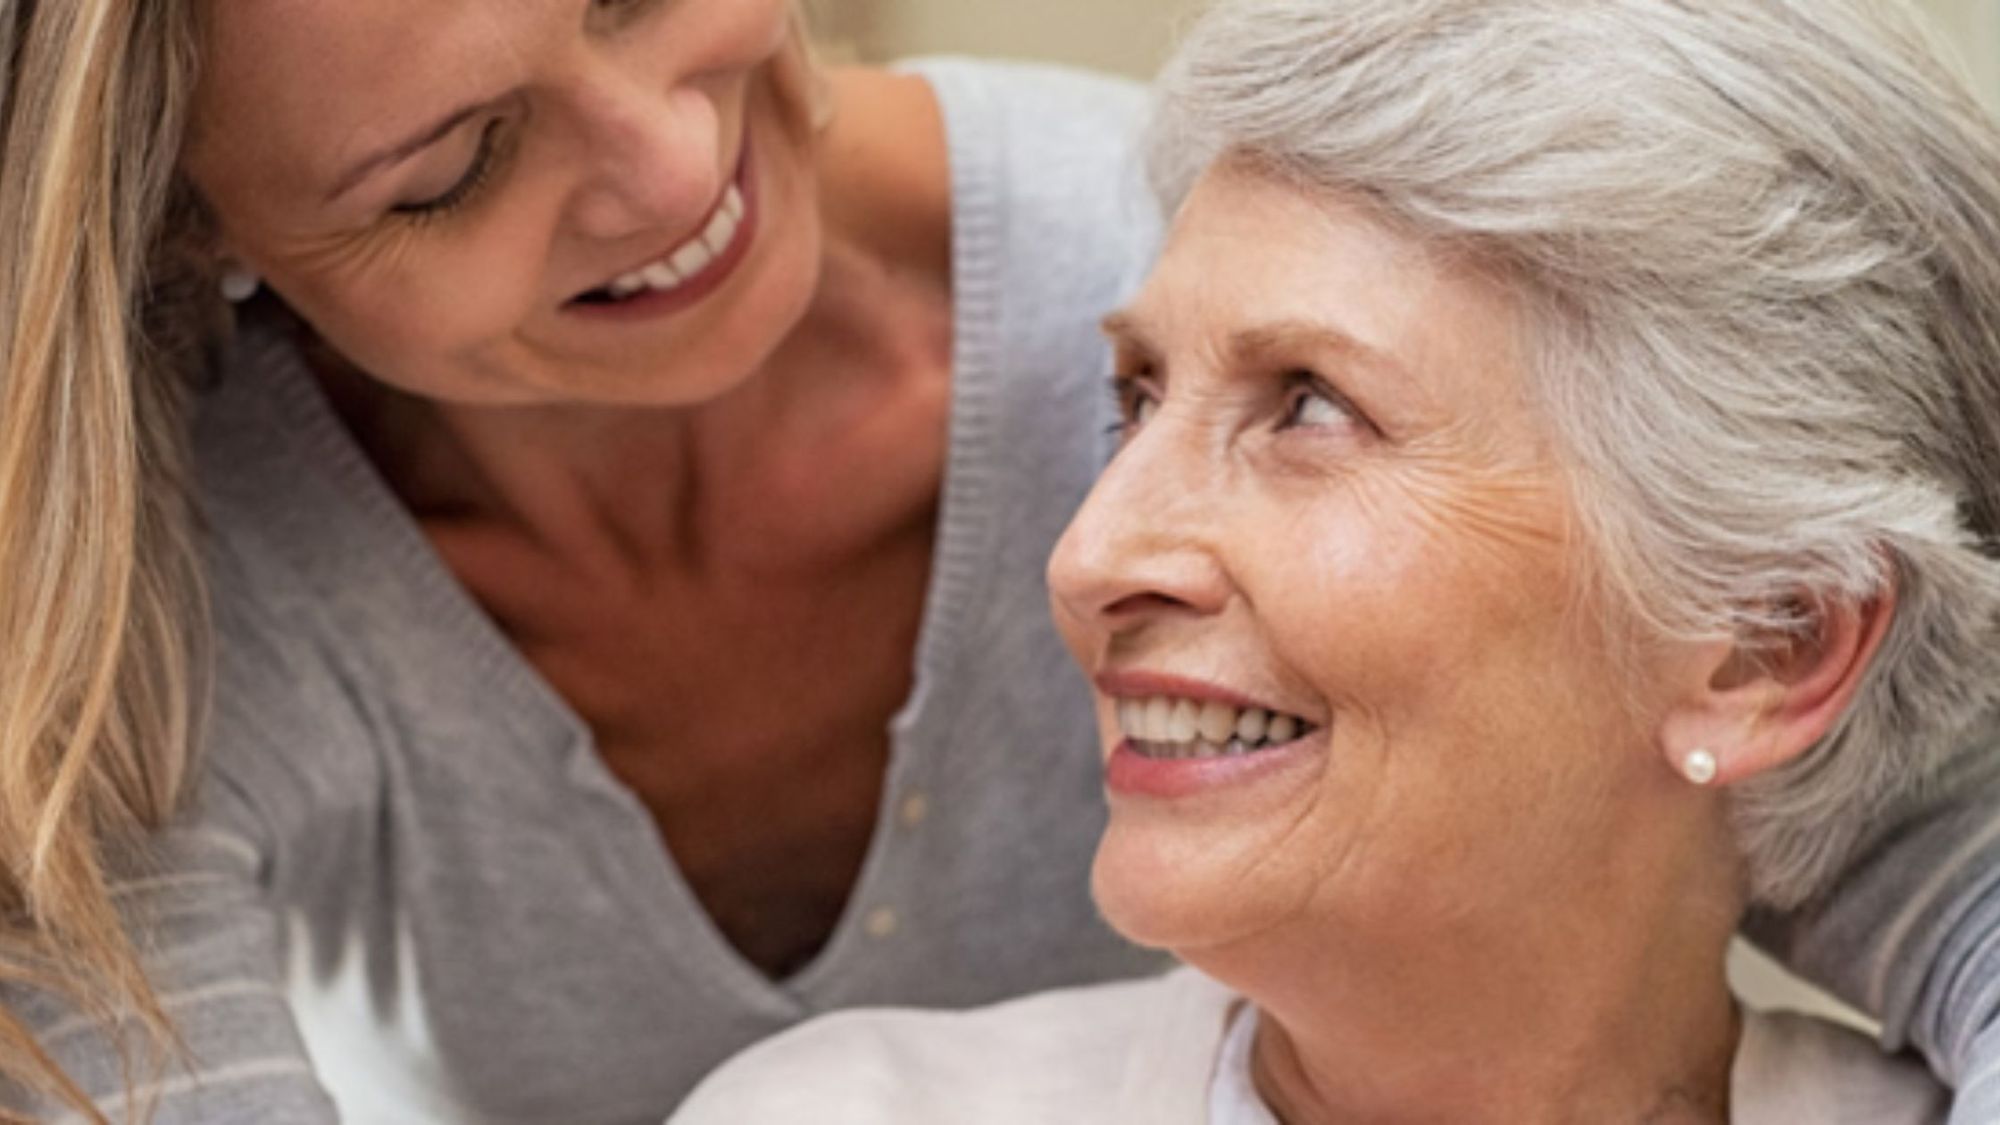 7 Things to Remember Before Booking Caregiver Services: What to Look For